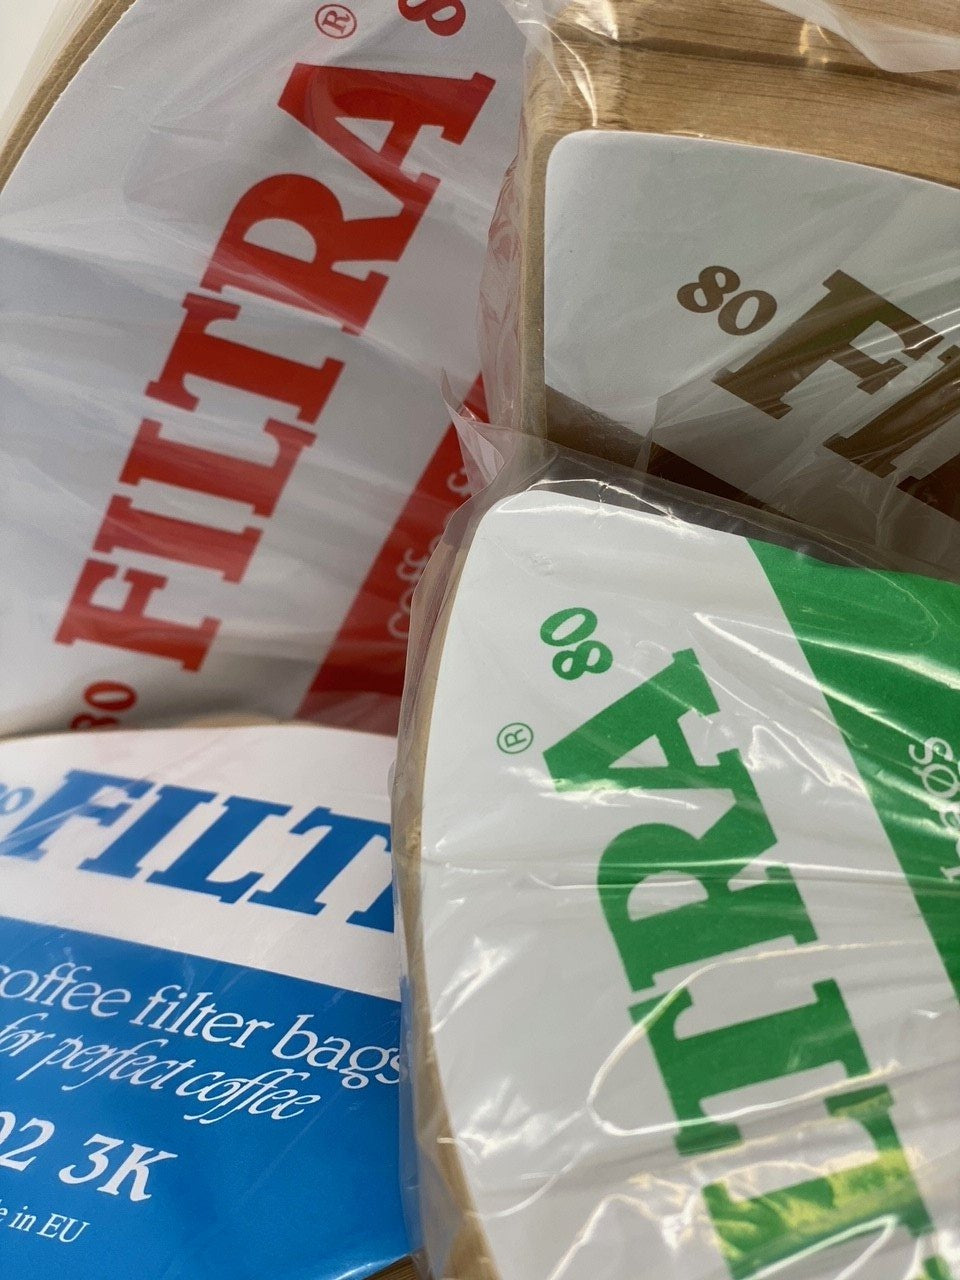 Filtra Coffee Filter Papers (80)